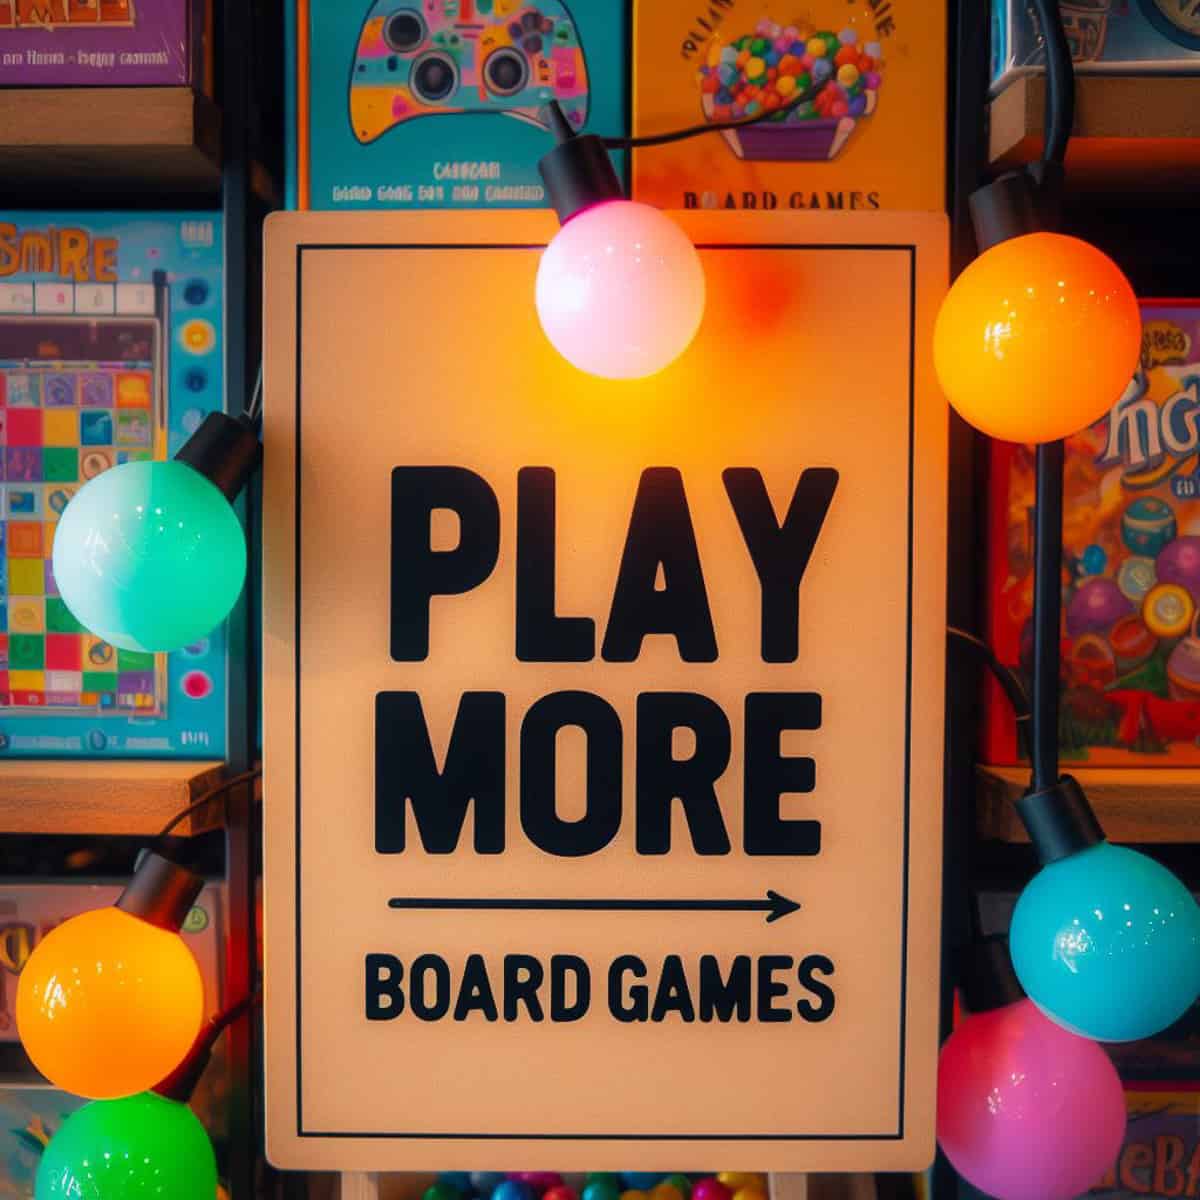 Sign saying "Play More Board Games" introducing the blog post about the top 3 popular board games